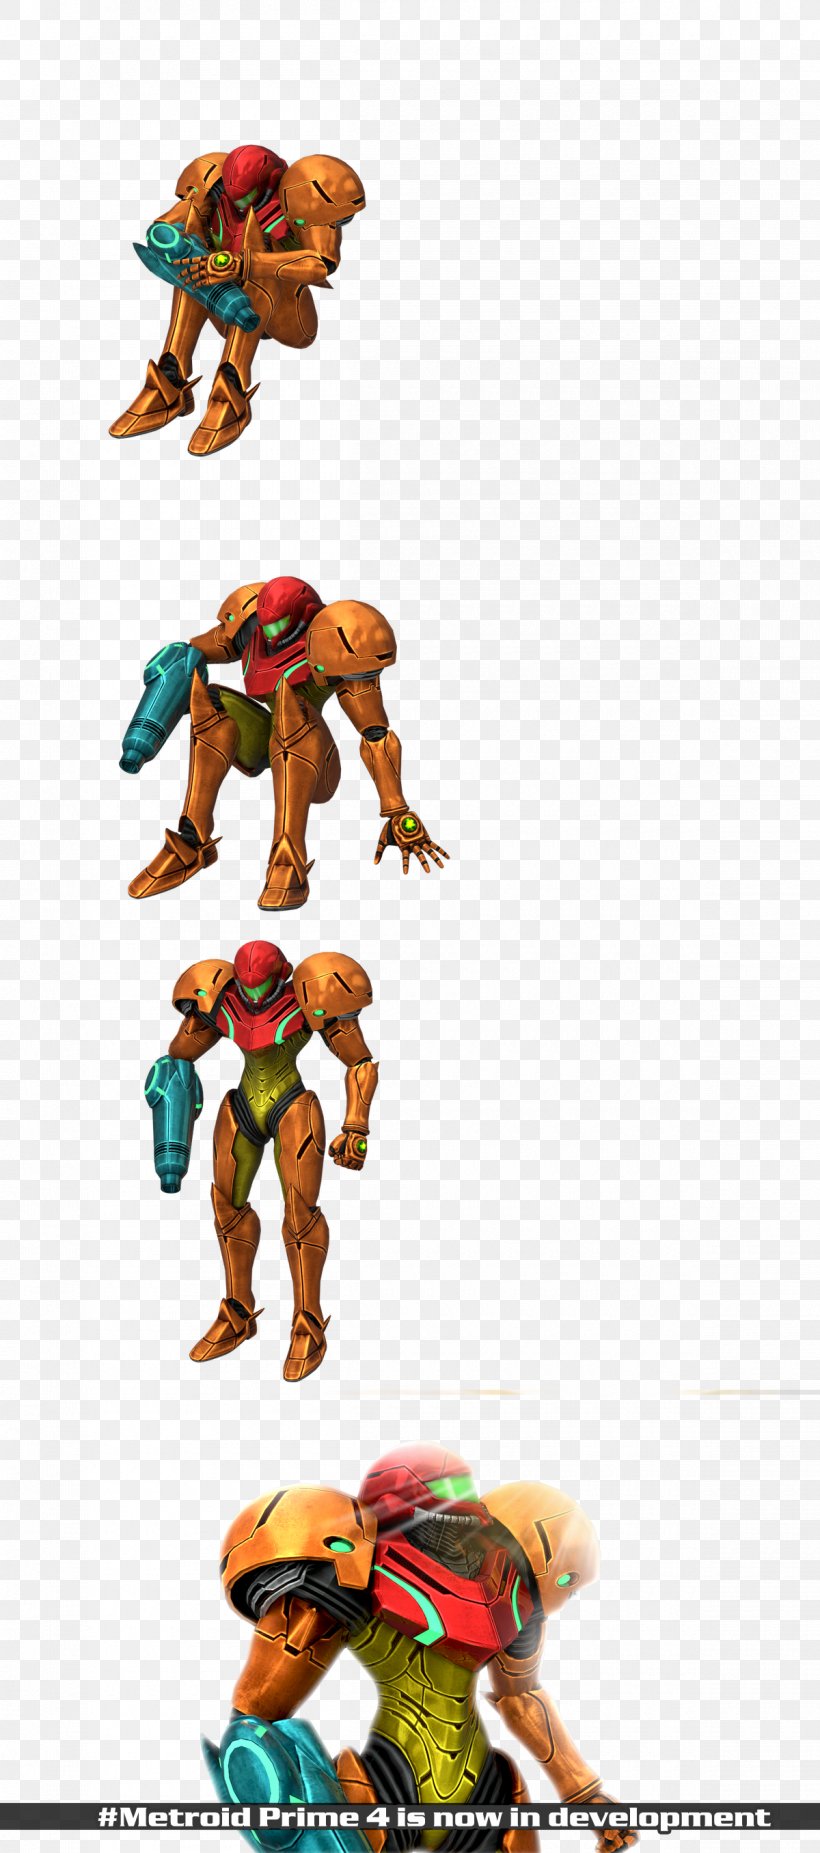 Action & Toy Figures Figurine Character Animated Cartoon, PNG, 1200x2712px, Action Toy Figures, Action Figure, Animated Cartoon, Character, Fictional Character Download Free